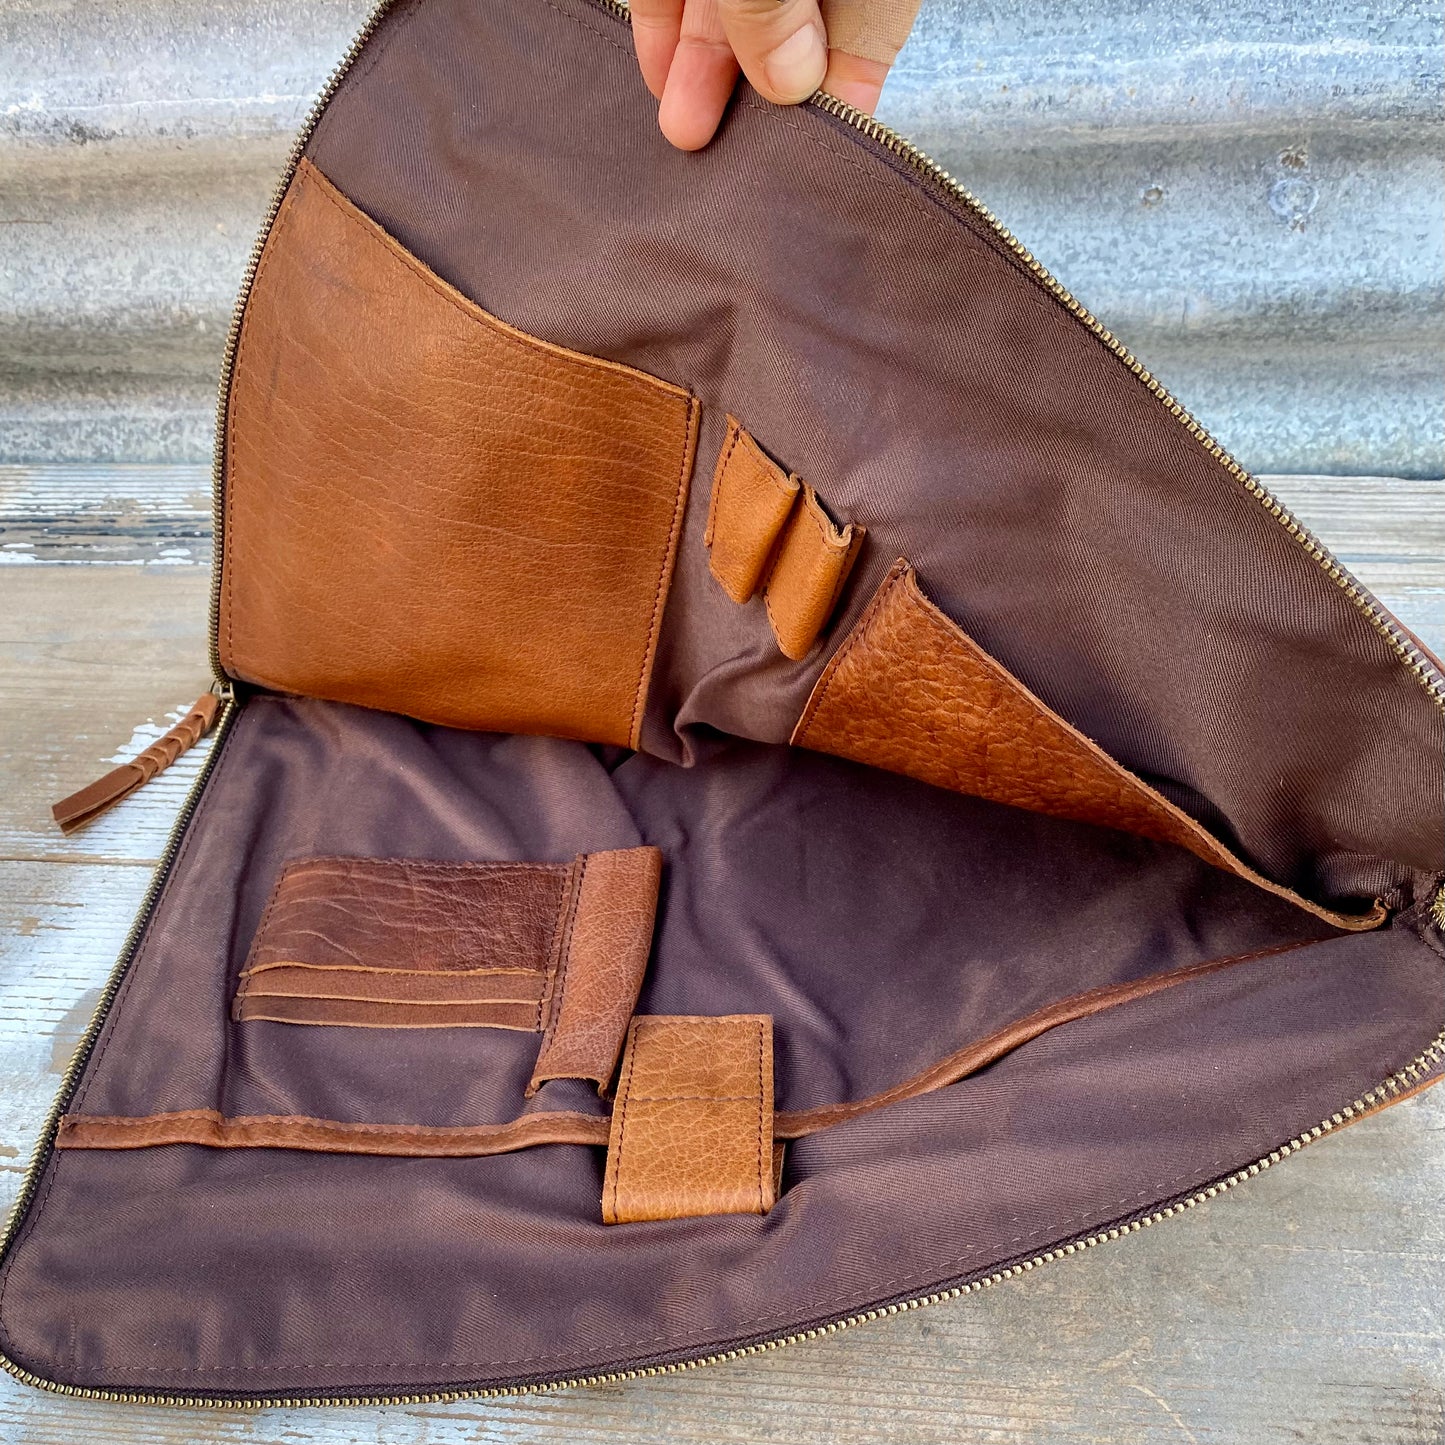 Leather Laptop / Notebook Sleeve